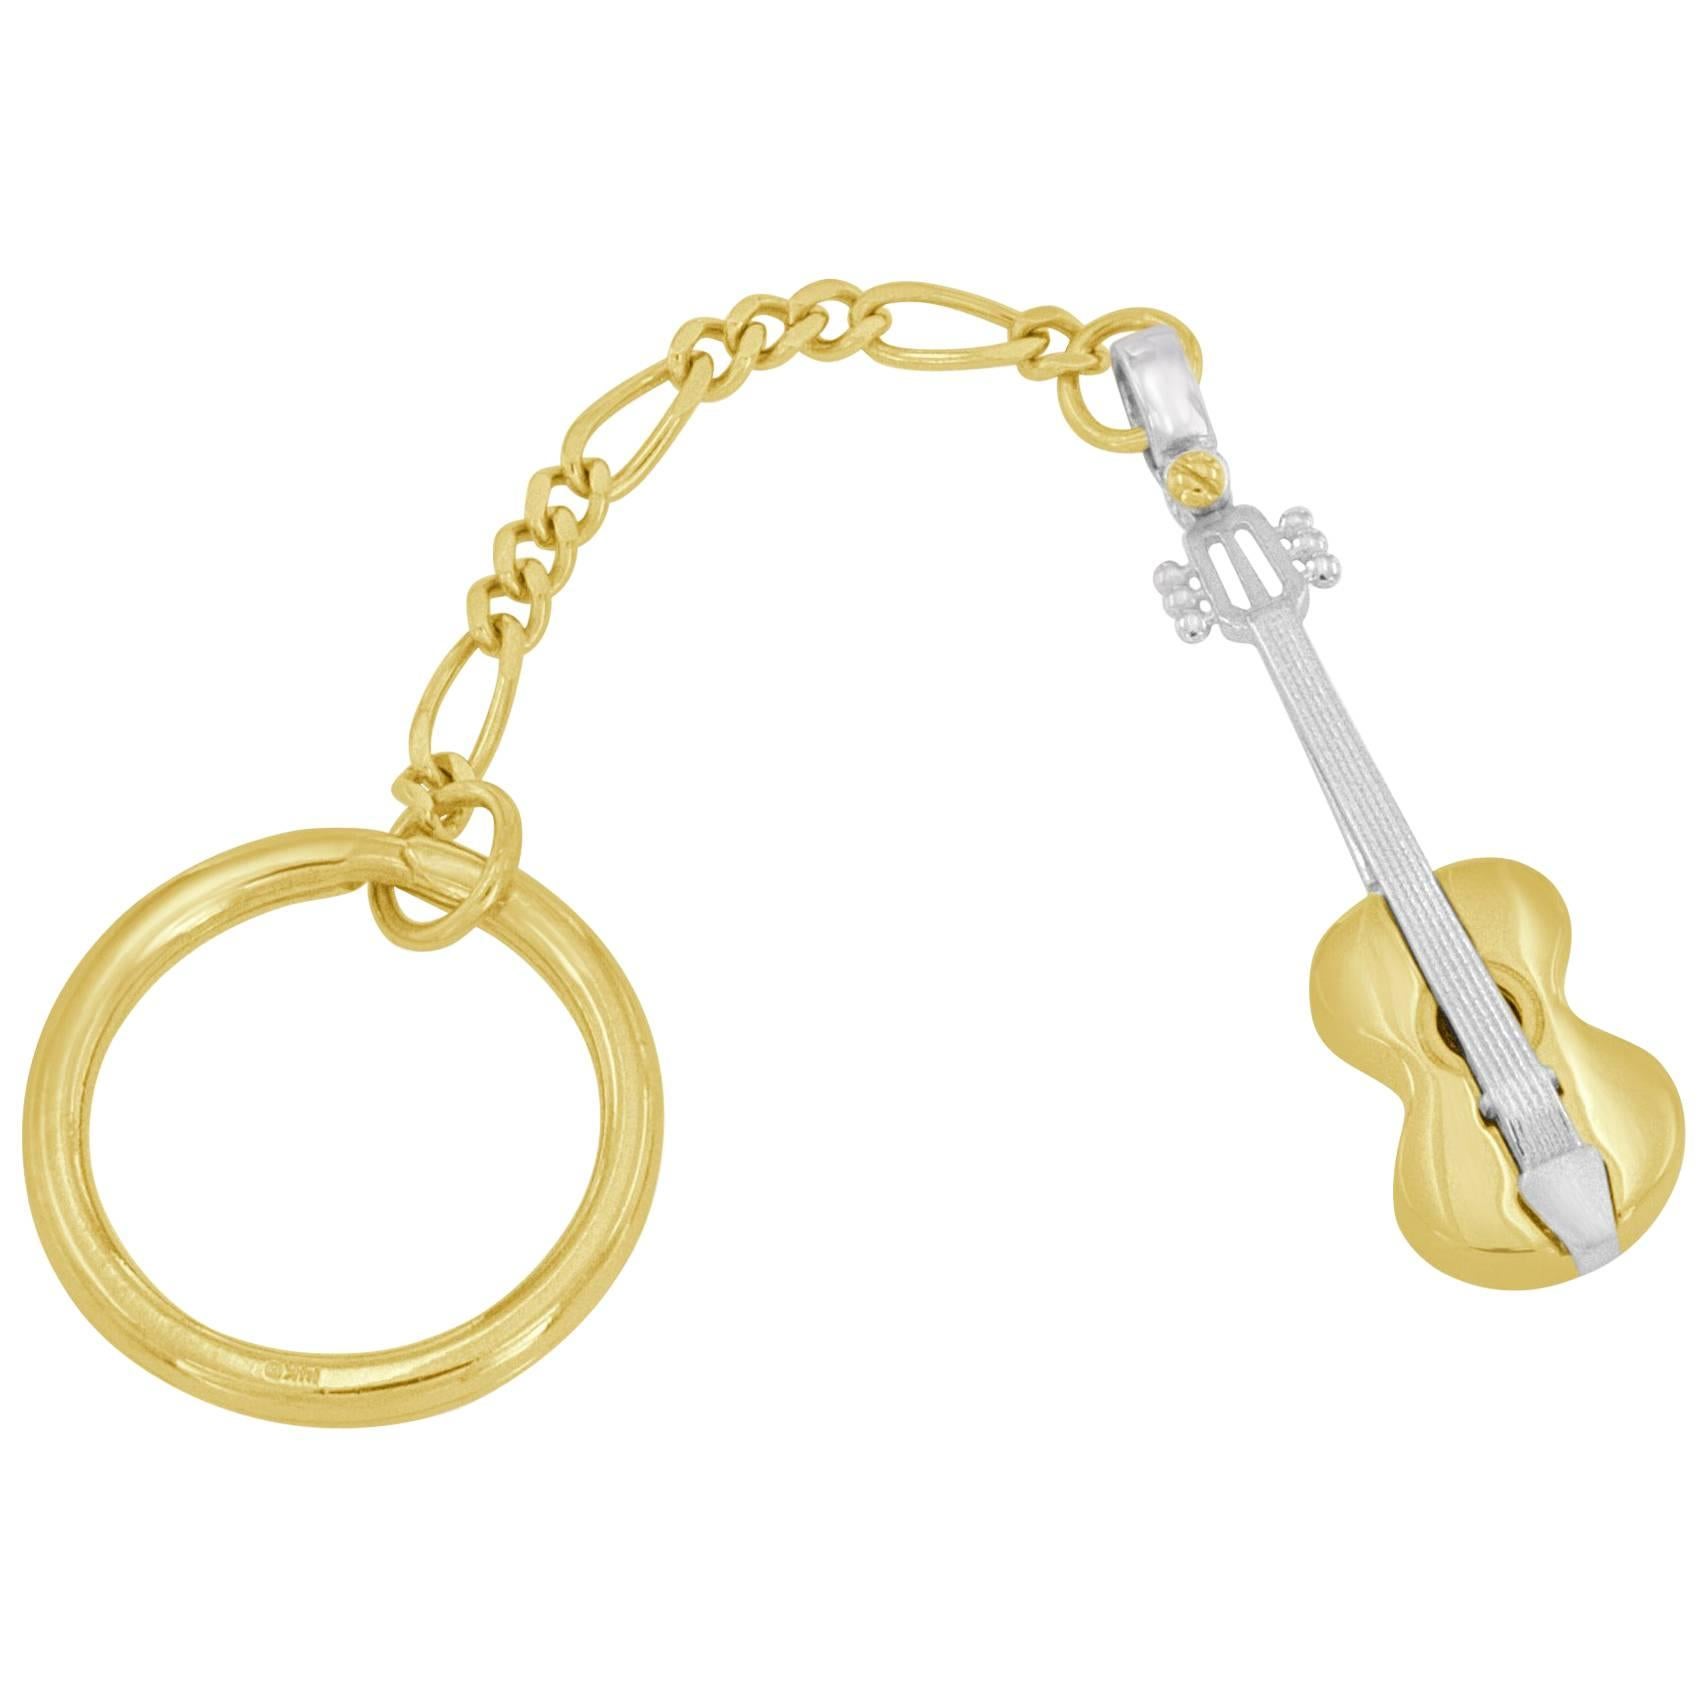 Gold Violin Key Chain For Sale